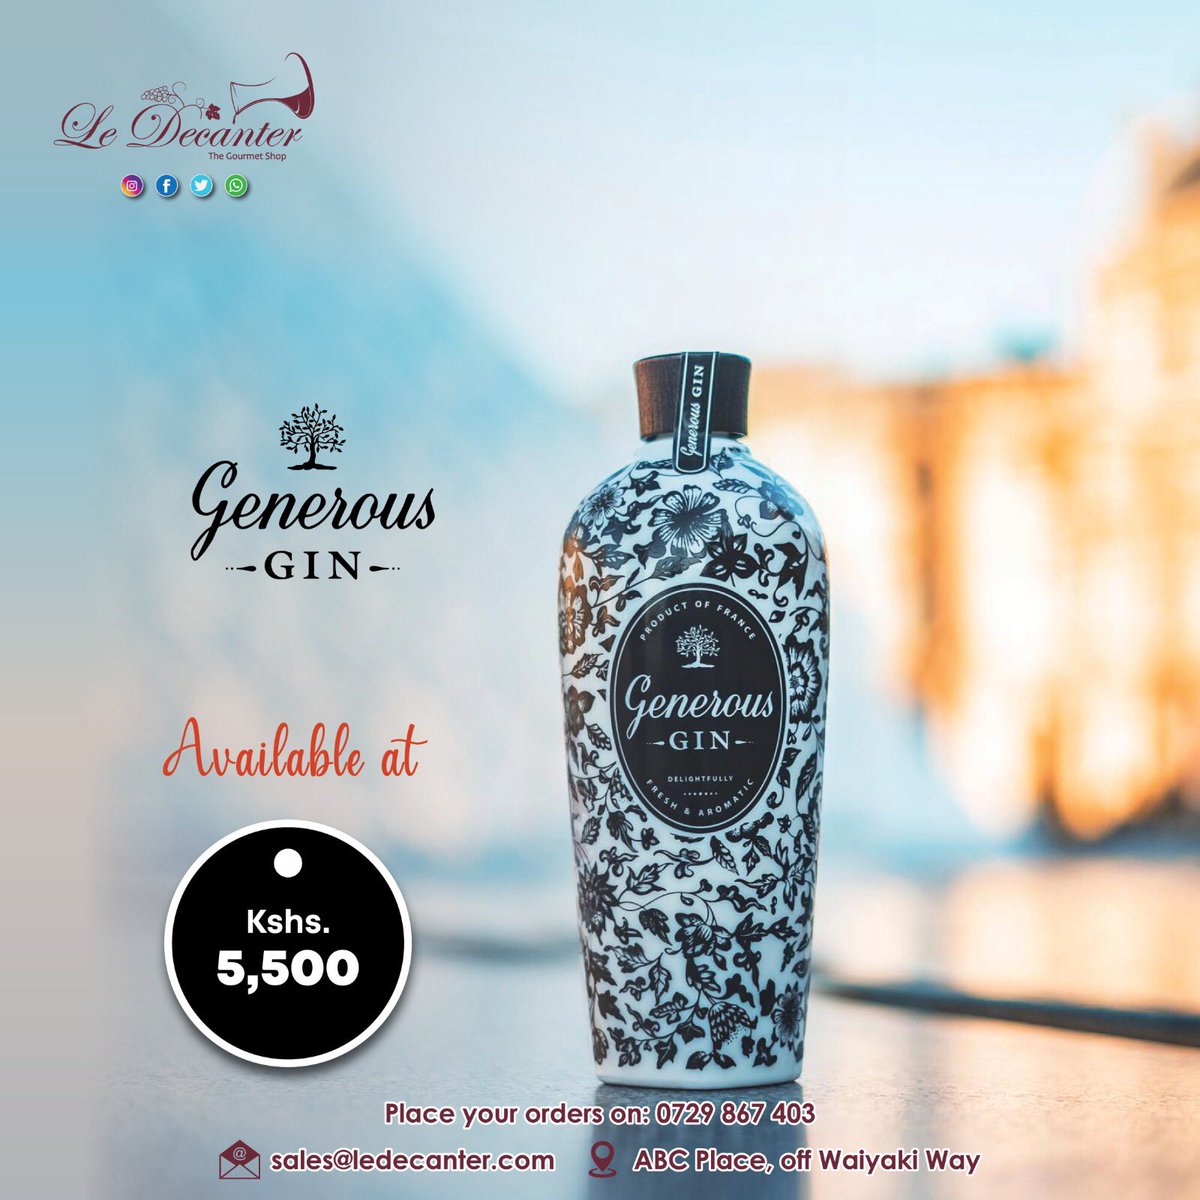 The idea behind Generous Gin was to create a totally original, but simple product, easy to drink and appreciate. A Gin which could give the best Gin & Tonic. Available at our shop for only 5,500/= To order contact us on 0729867403/sales@ledecanter.com #ledecanterspirits